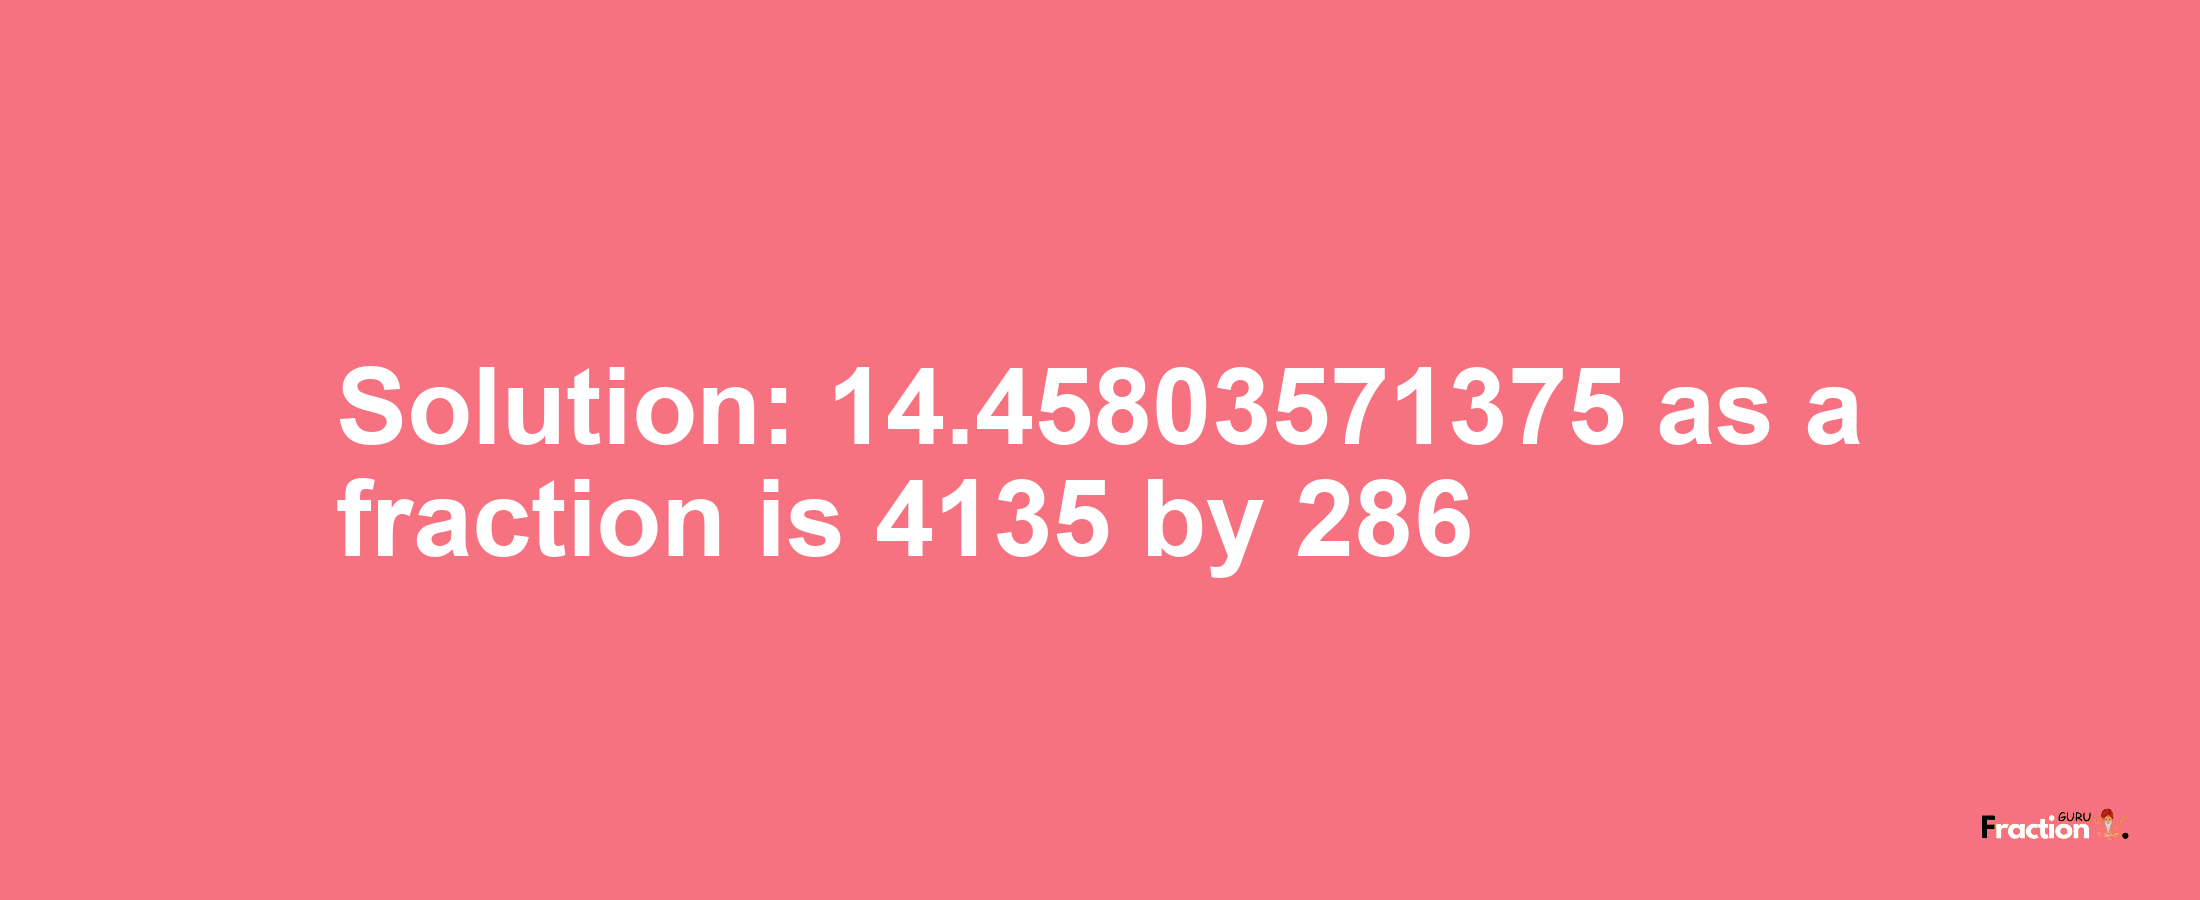 Solution:14.45803571375 as a fraction is 4135/286